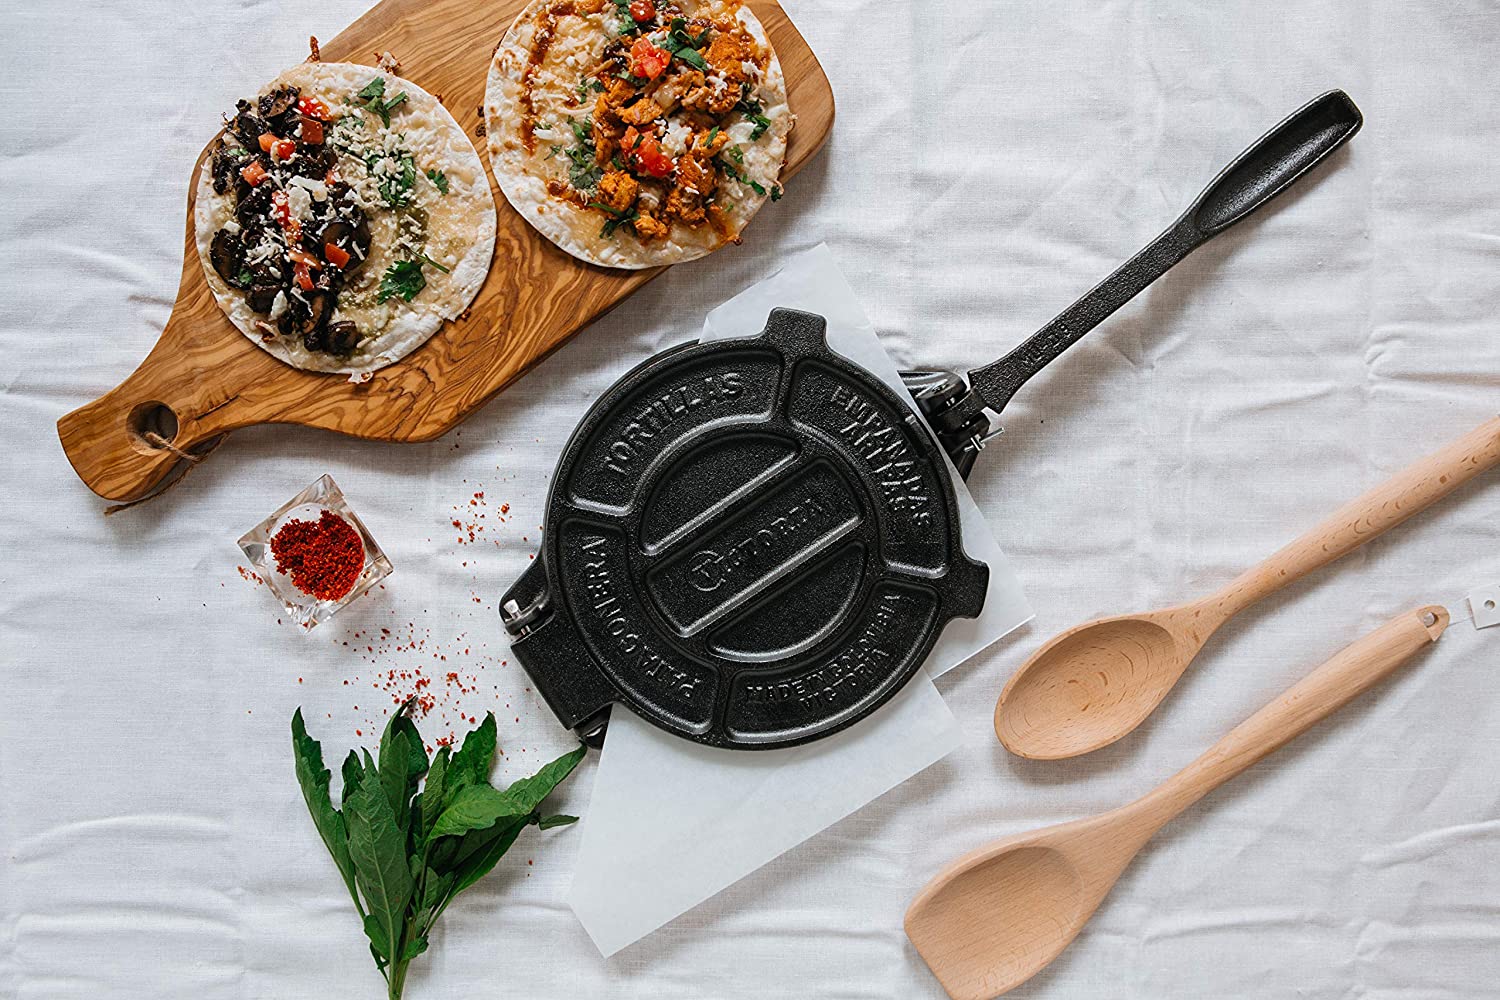 Cast Iron Pizza Stone and Comal by Victoria